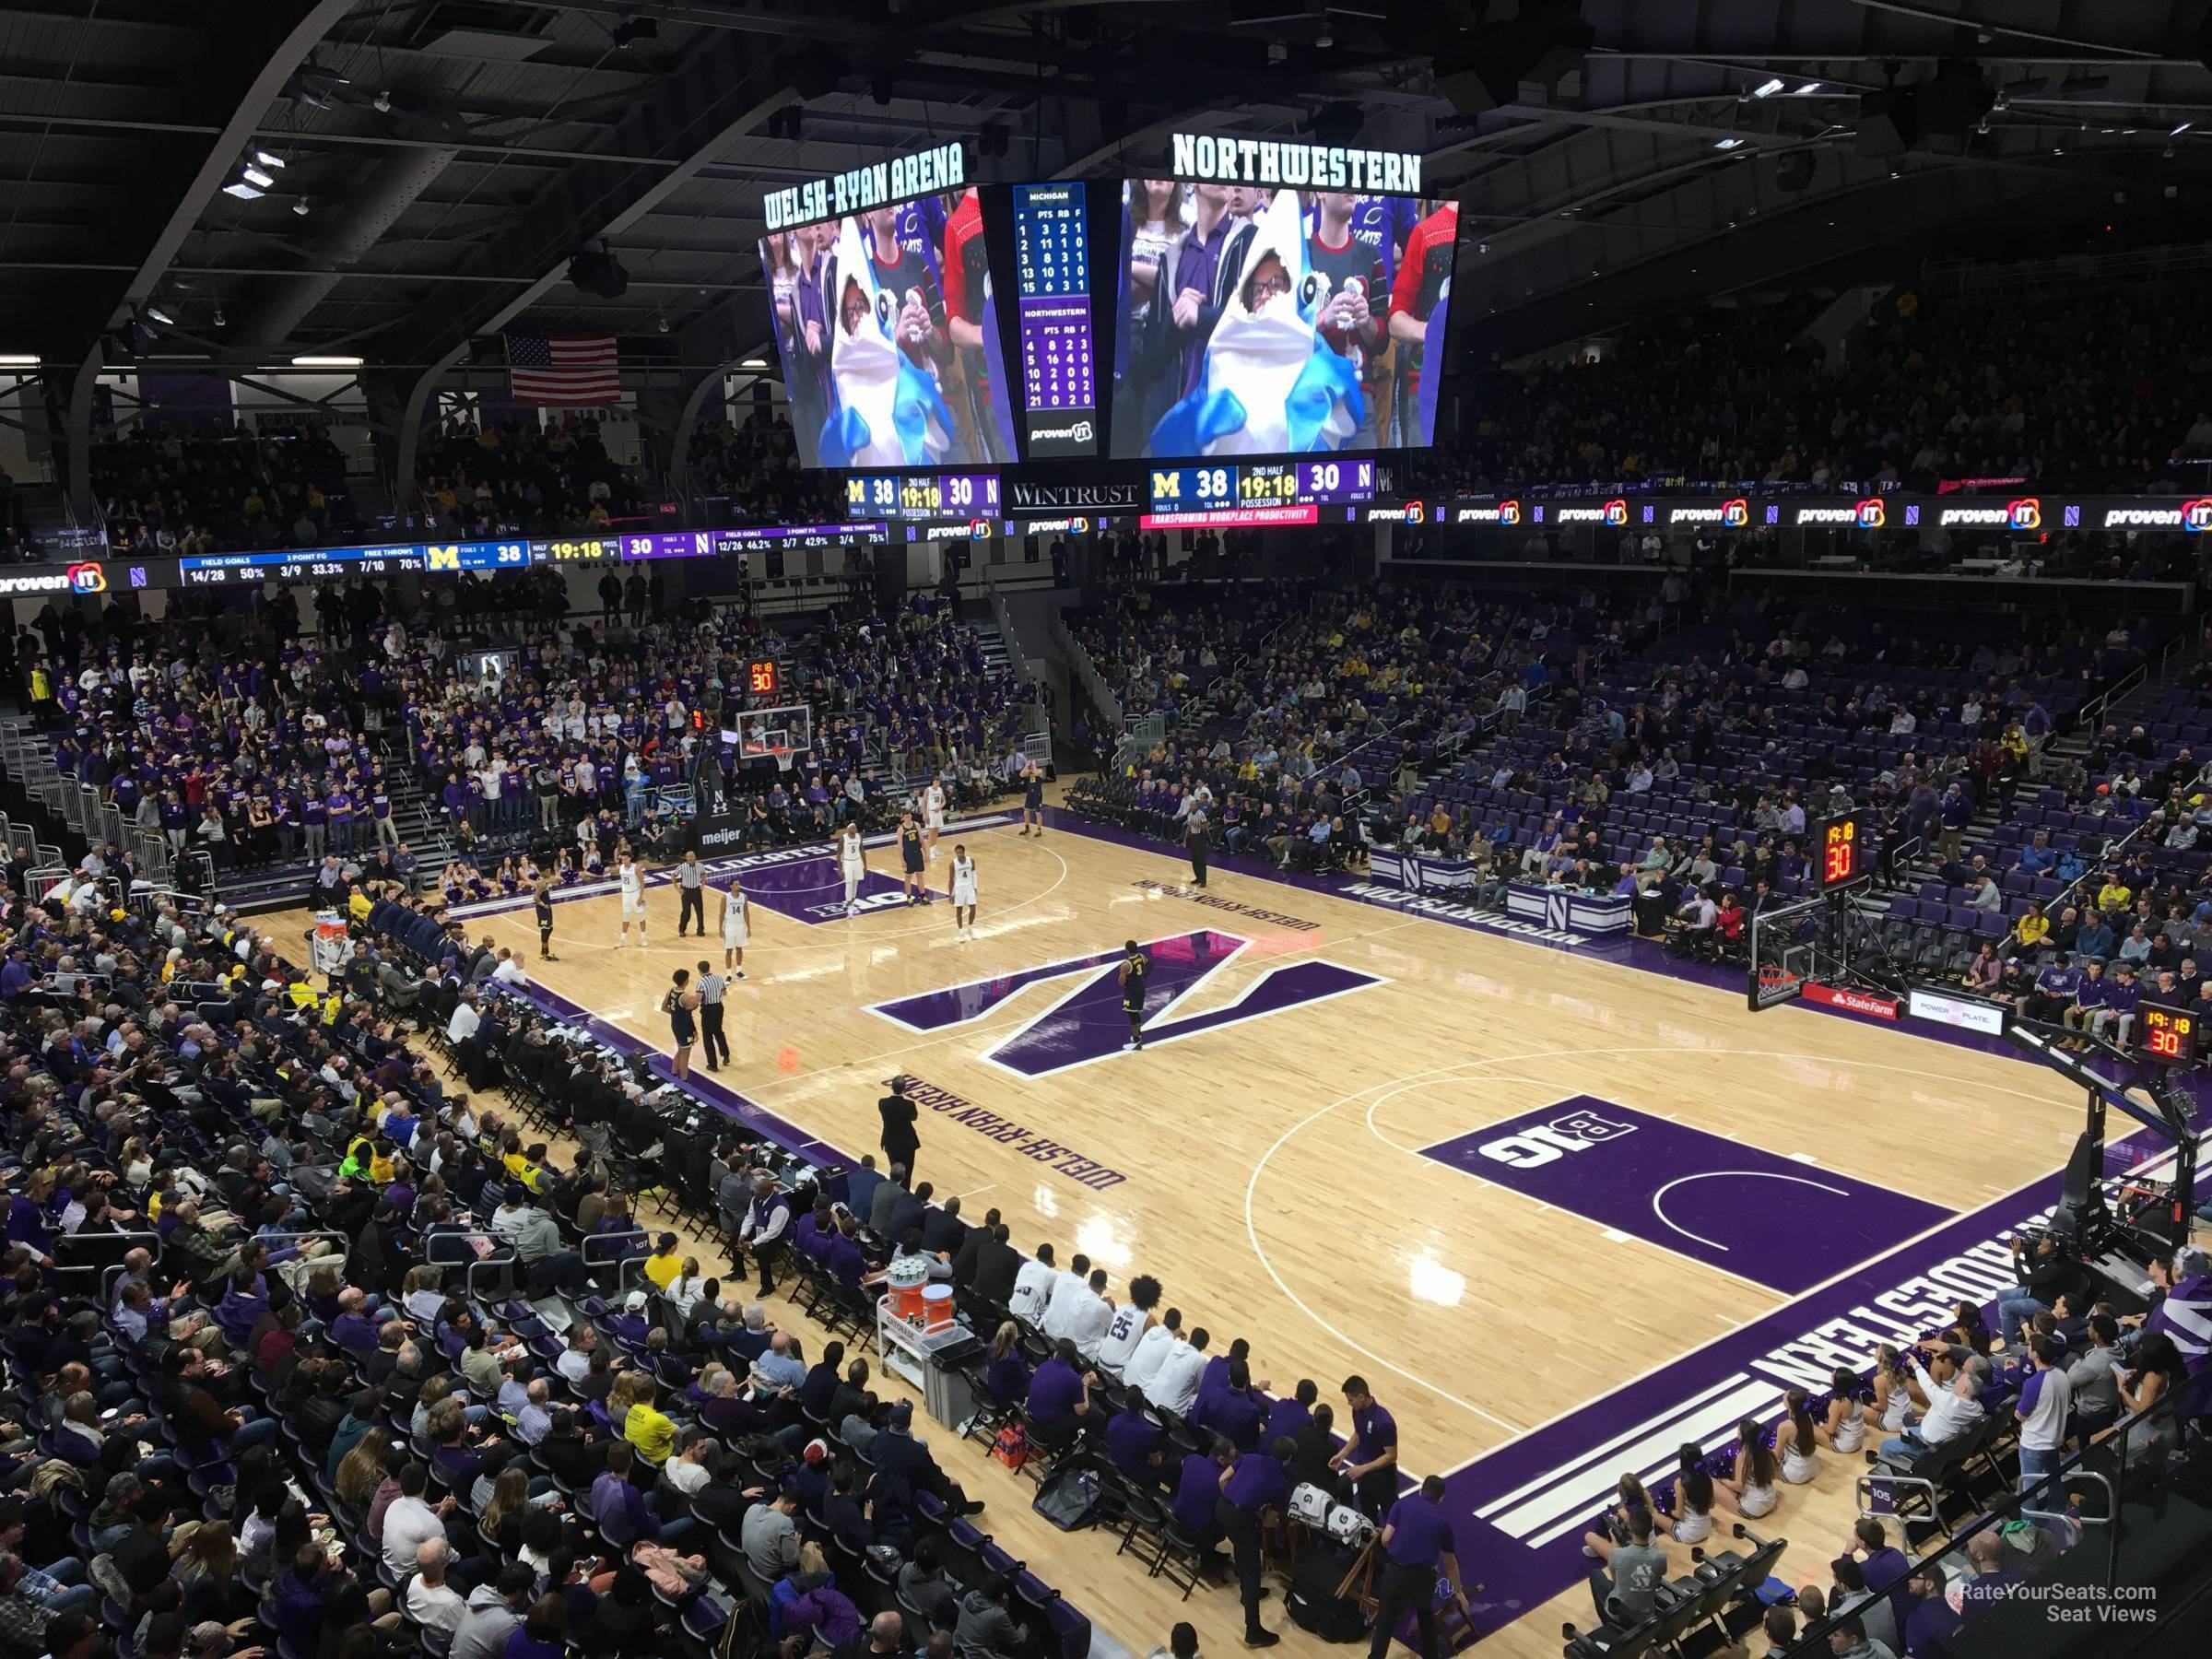 section 206, row 1 seat view  - welsh-ryan arena